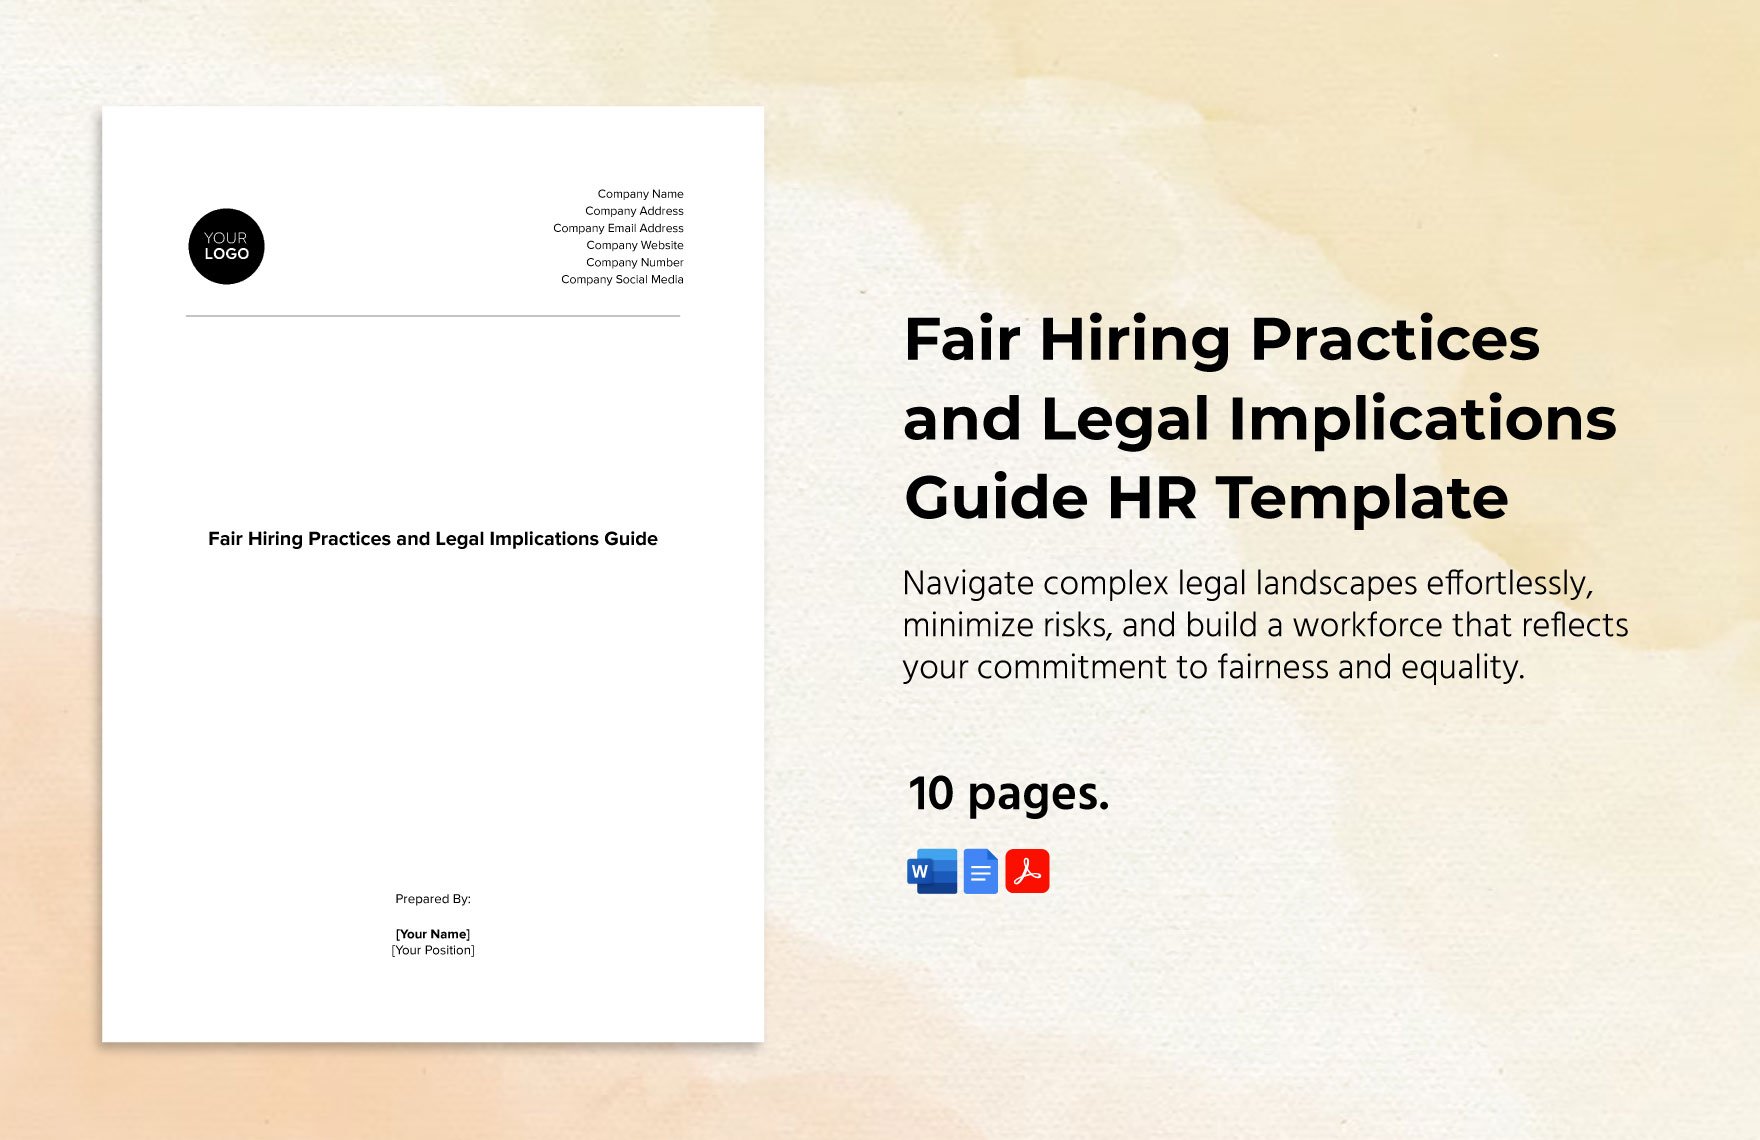 Fair Hiring Practices and Legal Implications Guide HR Template